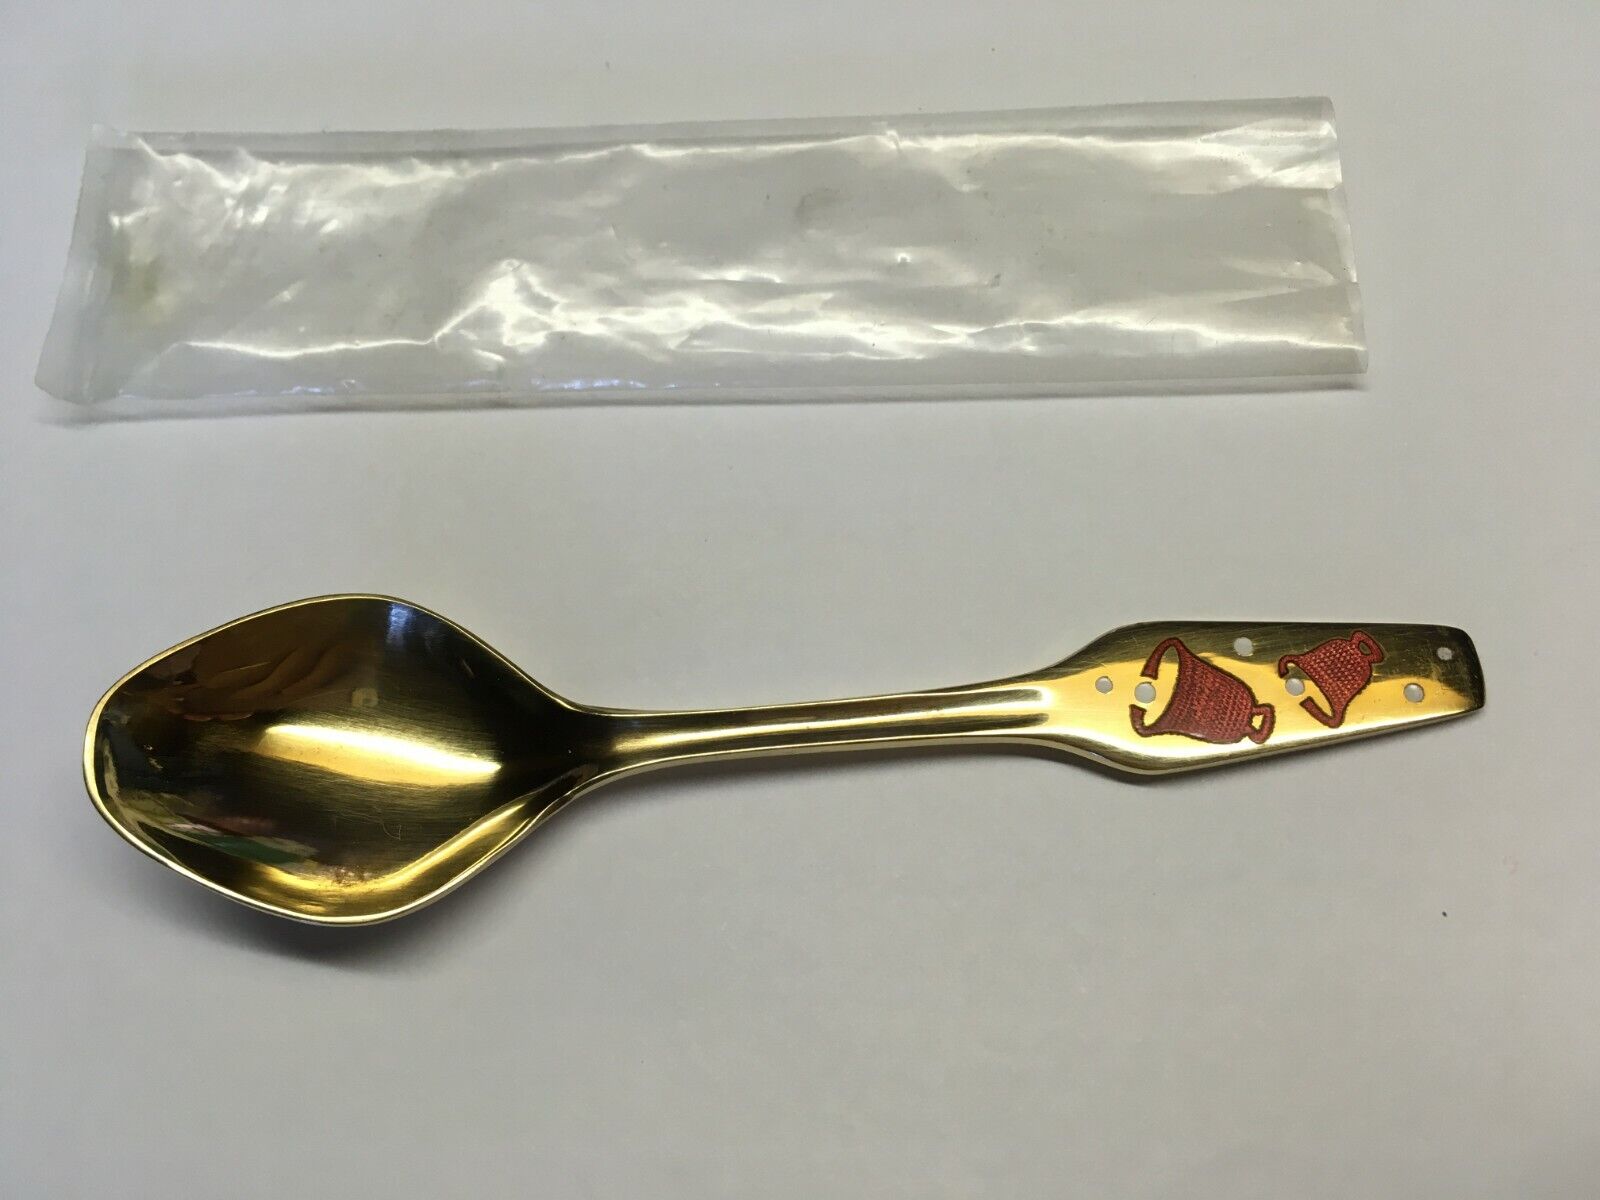 Vintage 1969 Meka Denmark Spoon 4-1/4” Gold Finish with Red Bells